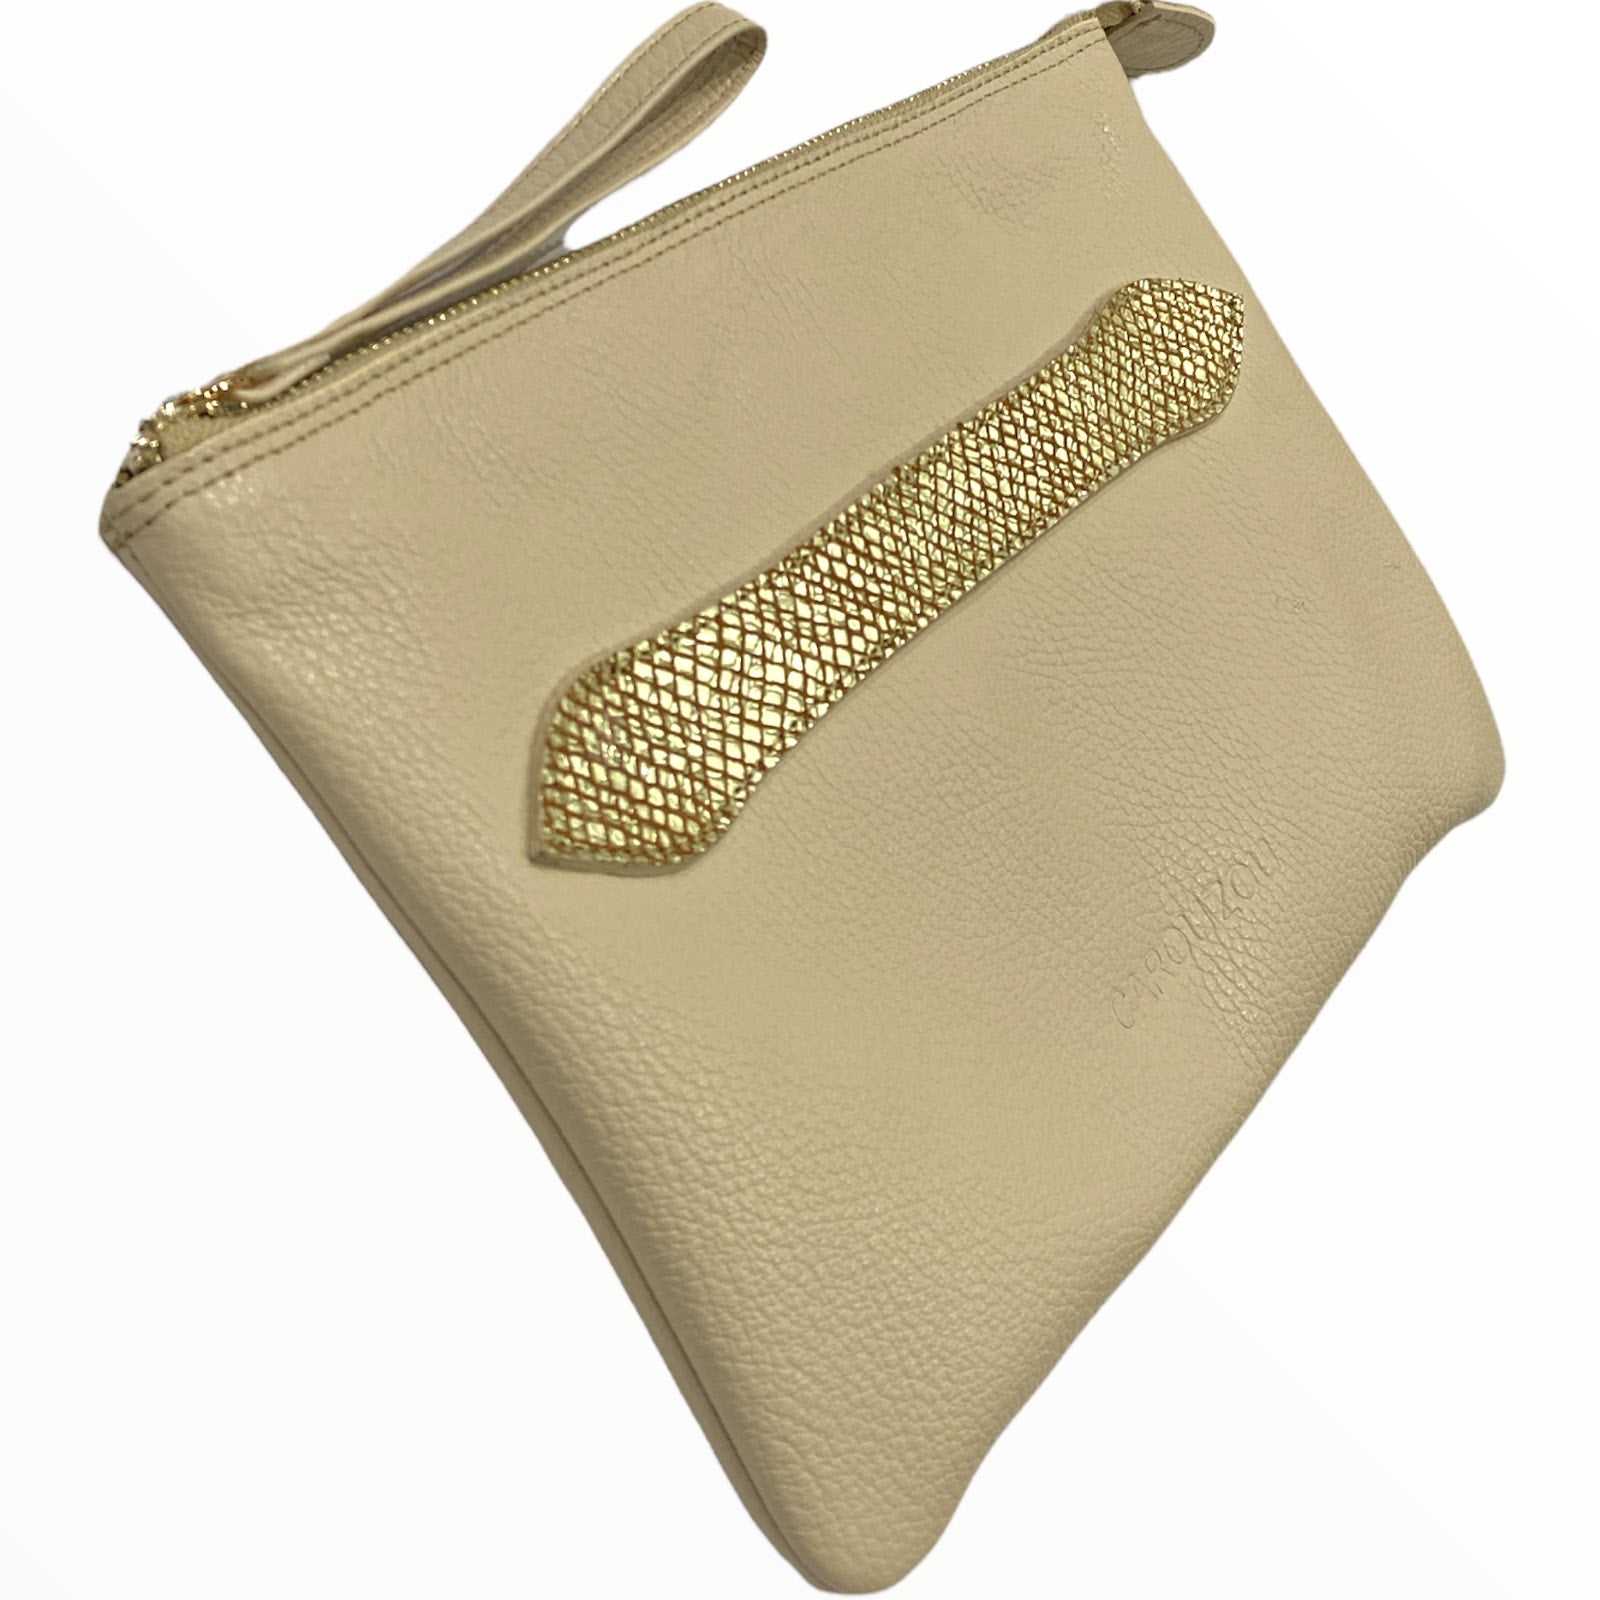 Vanilla leather bracelet clutch with gold details